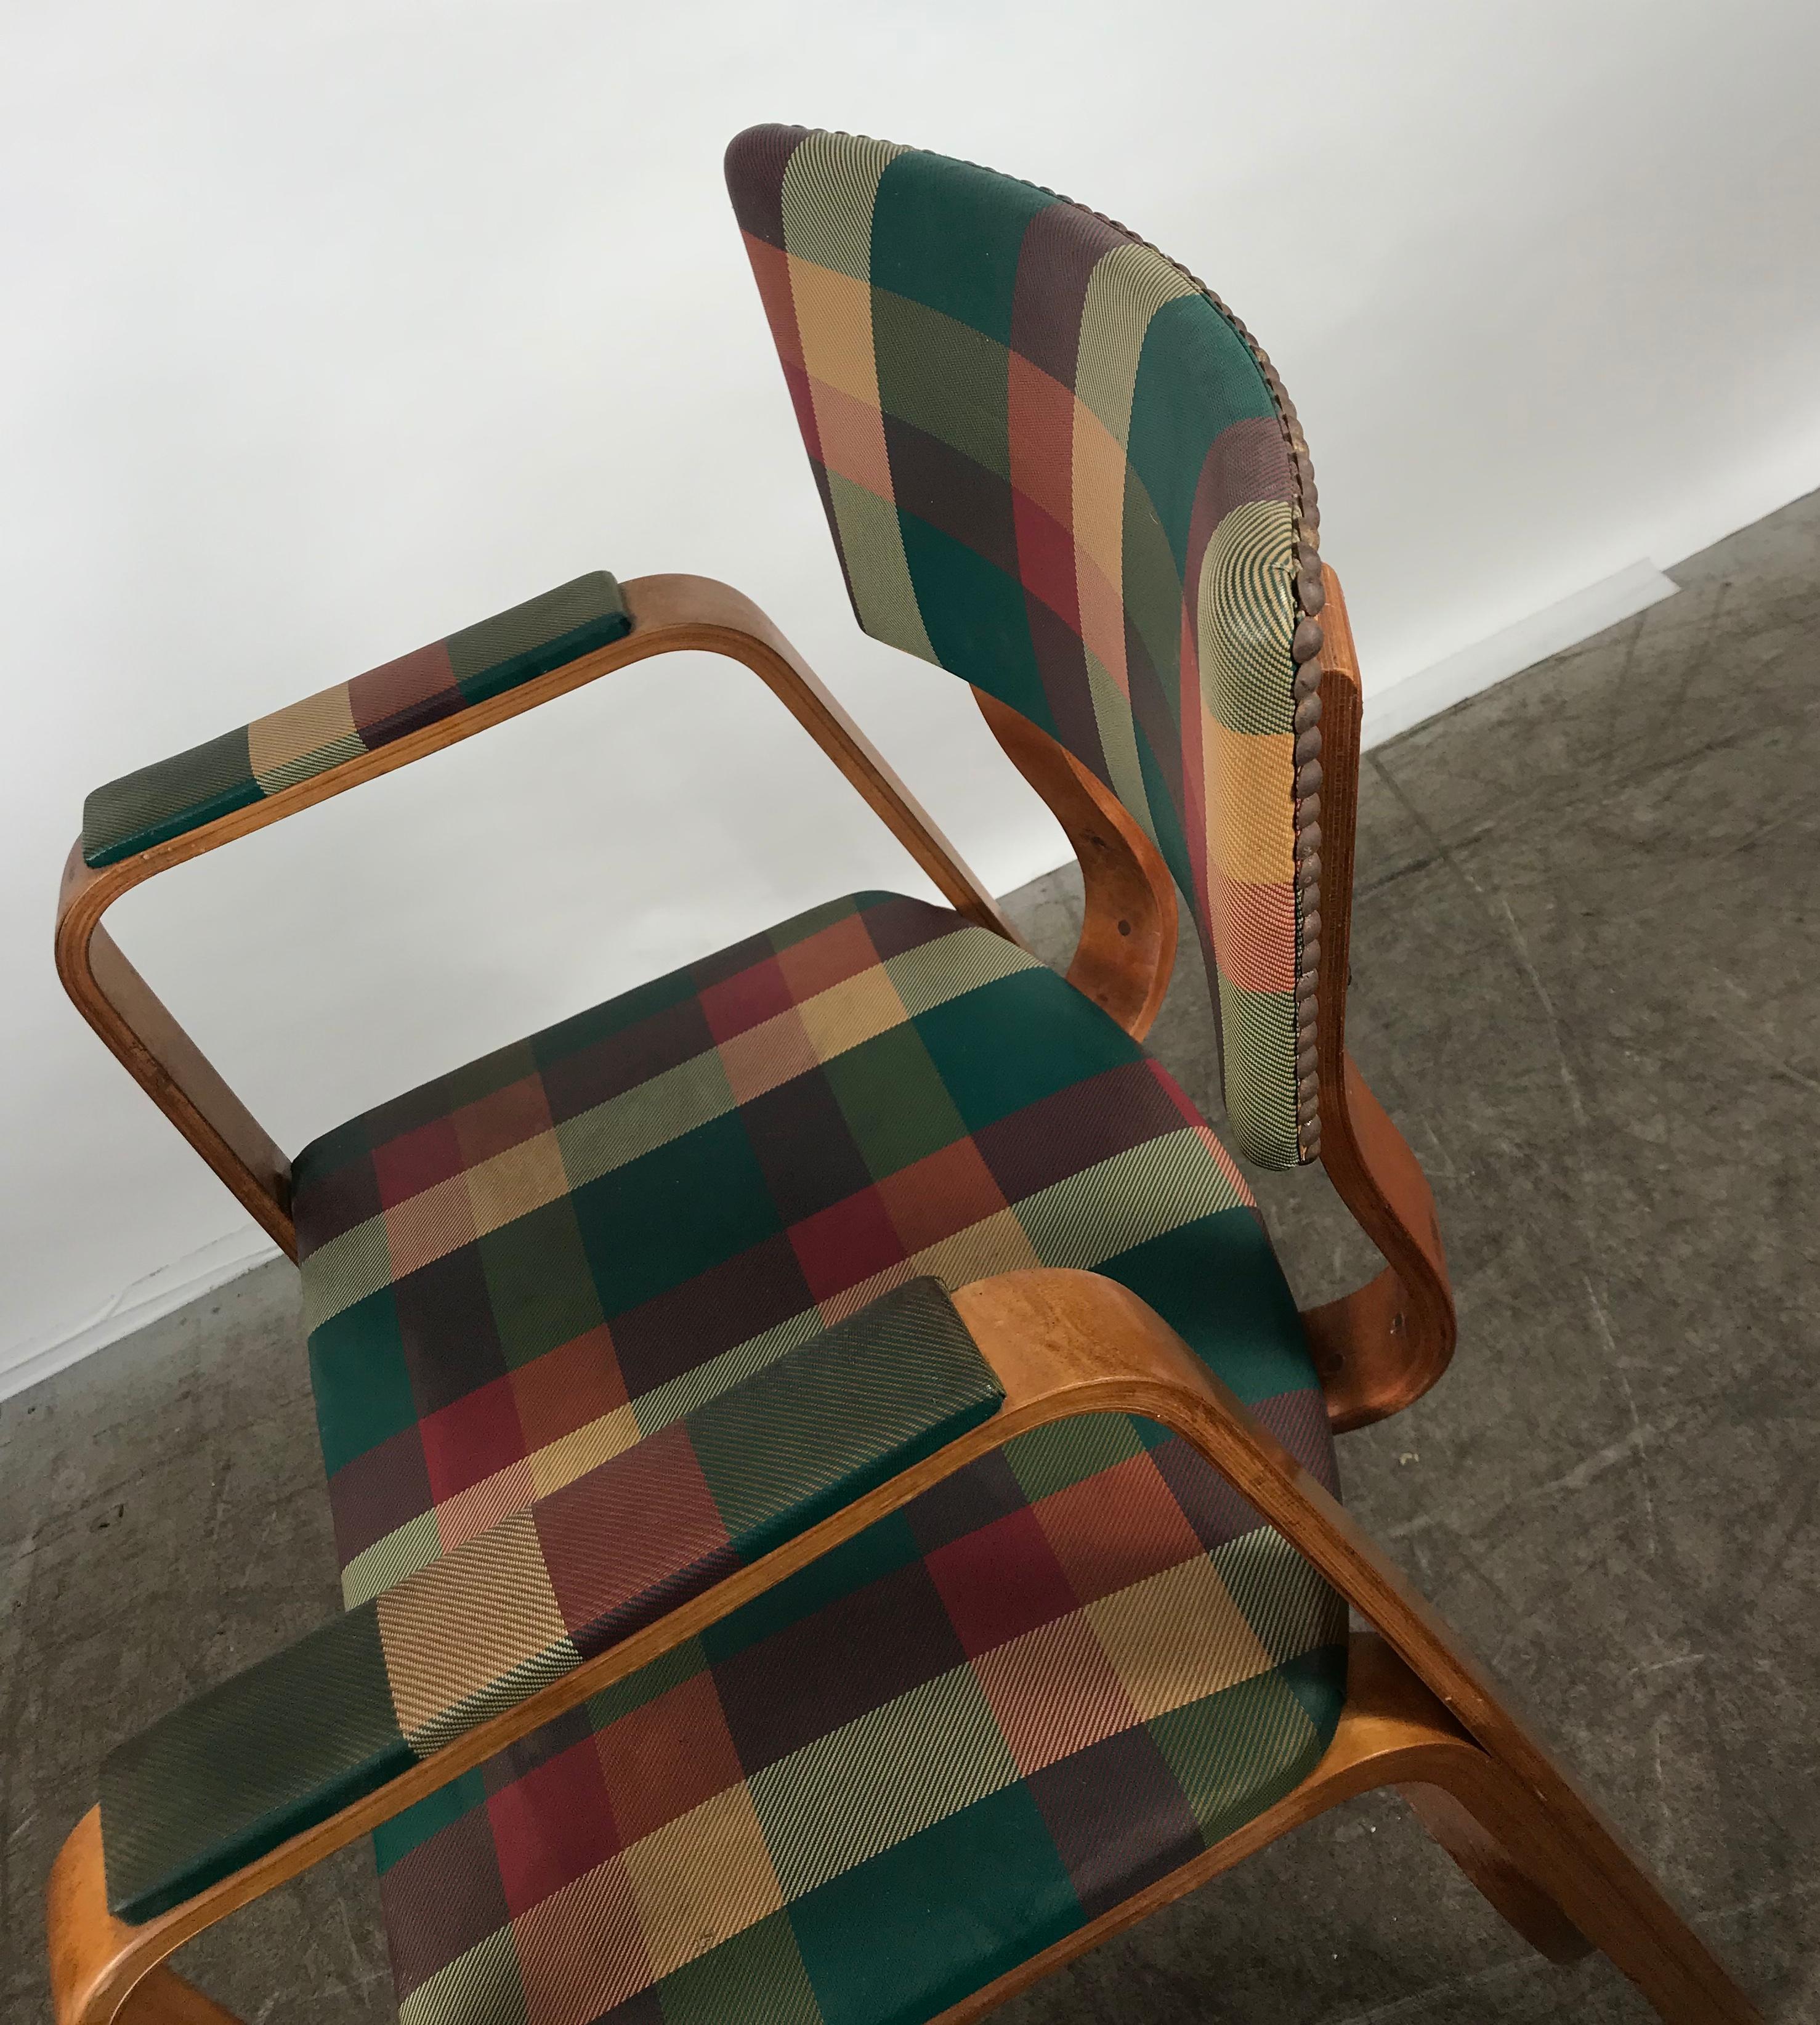 American Classic Bentwood Armchair with Original Plaid Oil Cloth by Thonet Brothers 1940 For Sale